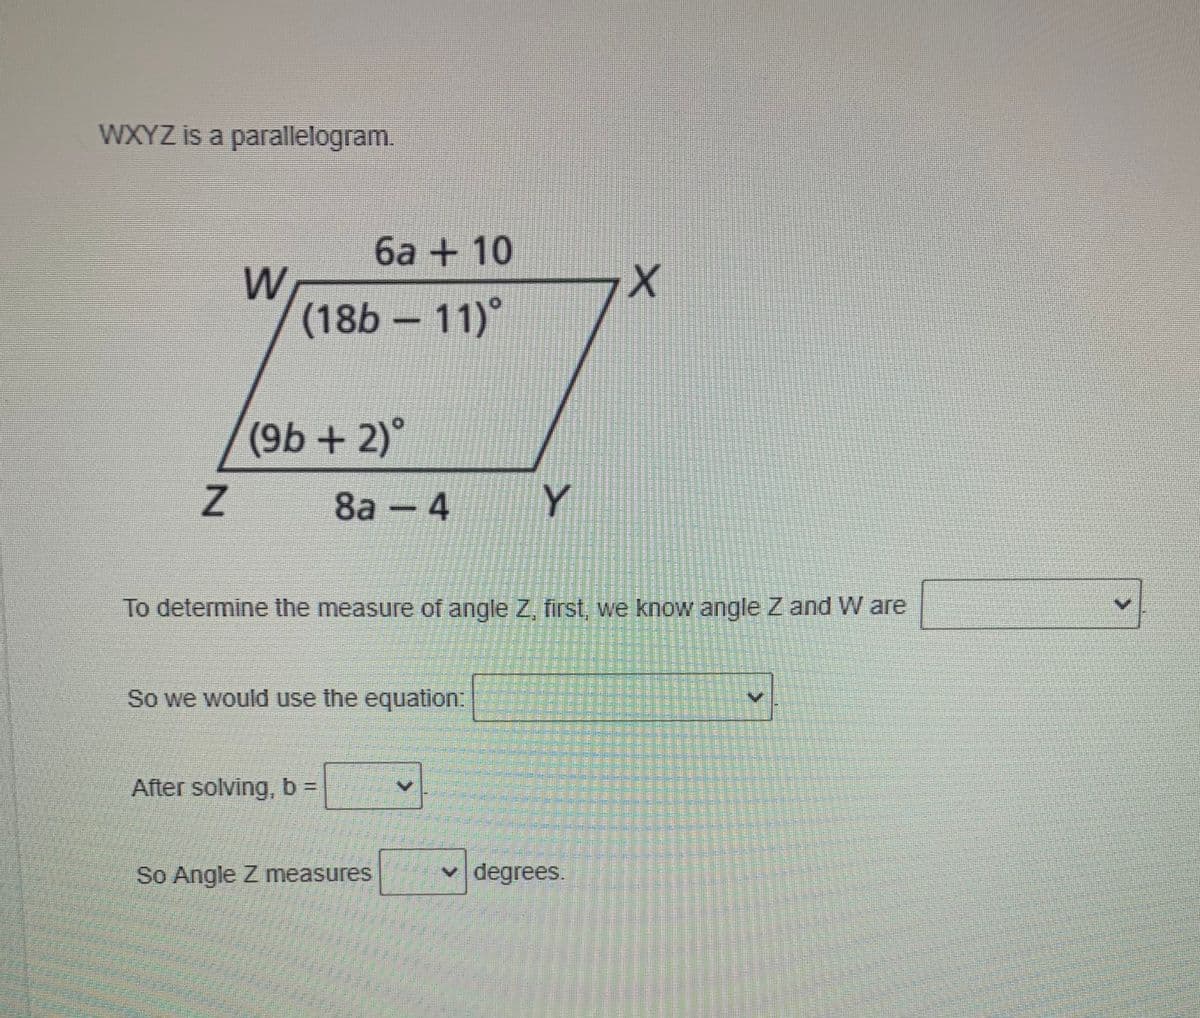 WXYZ is a parallelogram.
6a + 10
W
(18b – 11)°
(9b+ 2)°
8а — 4
Y
To determine the measure of angle Z, first, we know angle Z and W are
So we would use the equation:
After solving, b% D
So Angle Z measures
v degrees.
